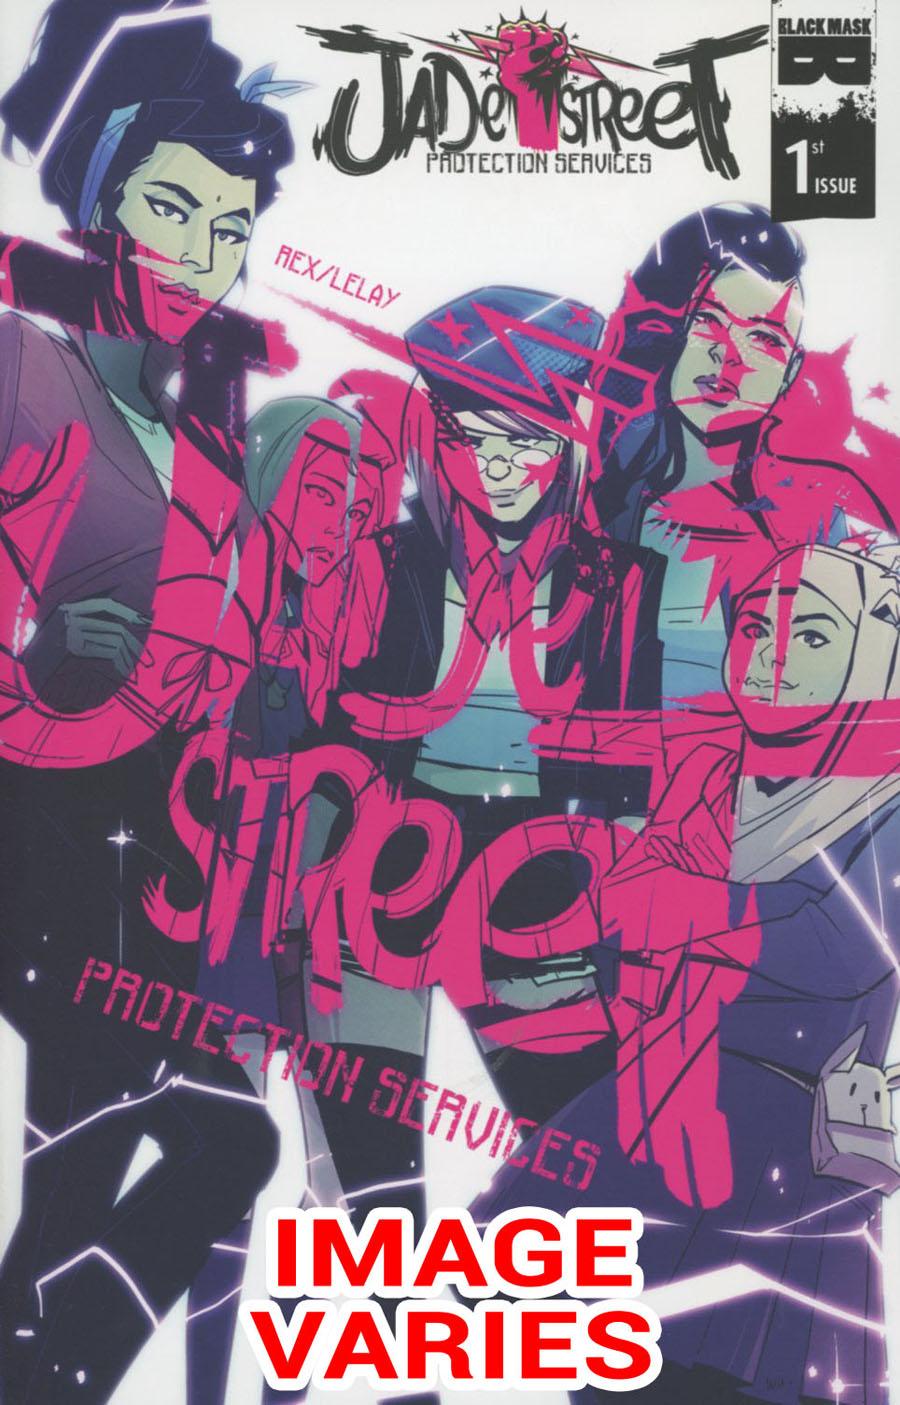 Jade Street Protection Services Vol. 1 #1